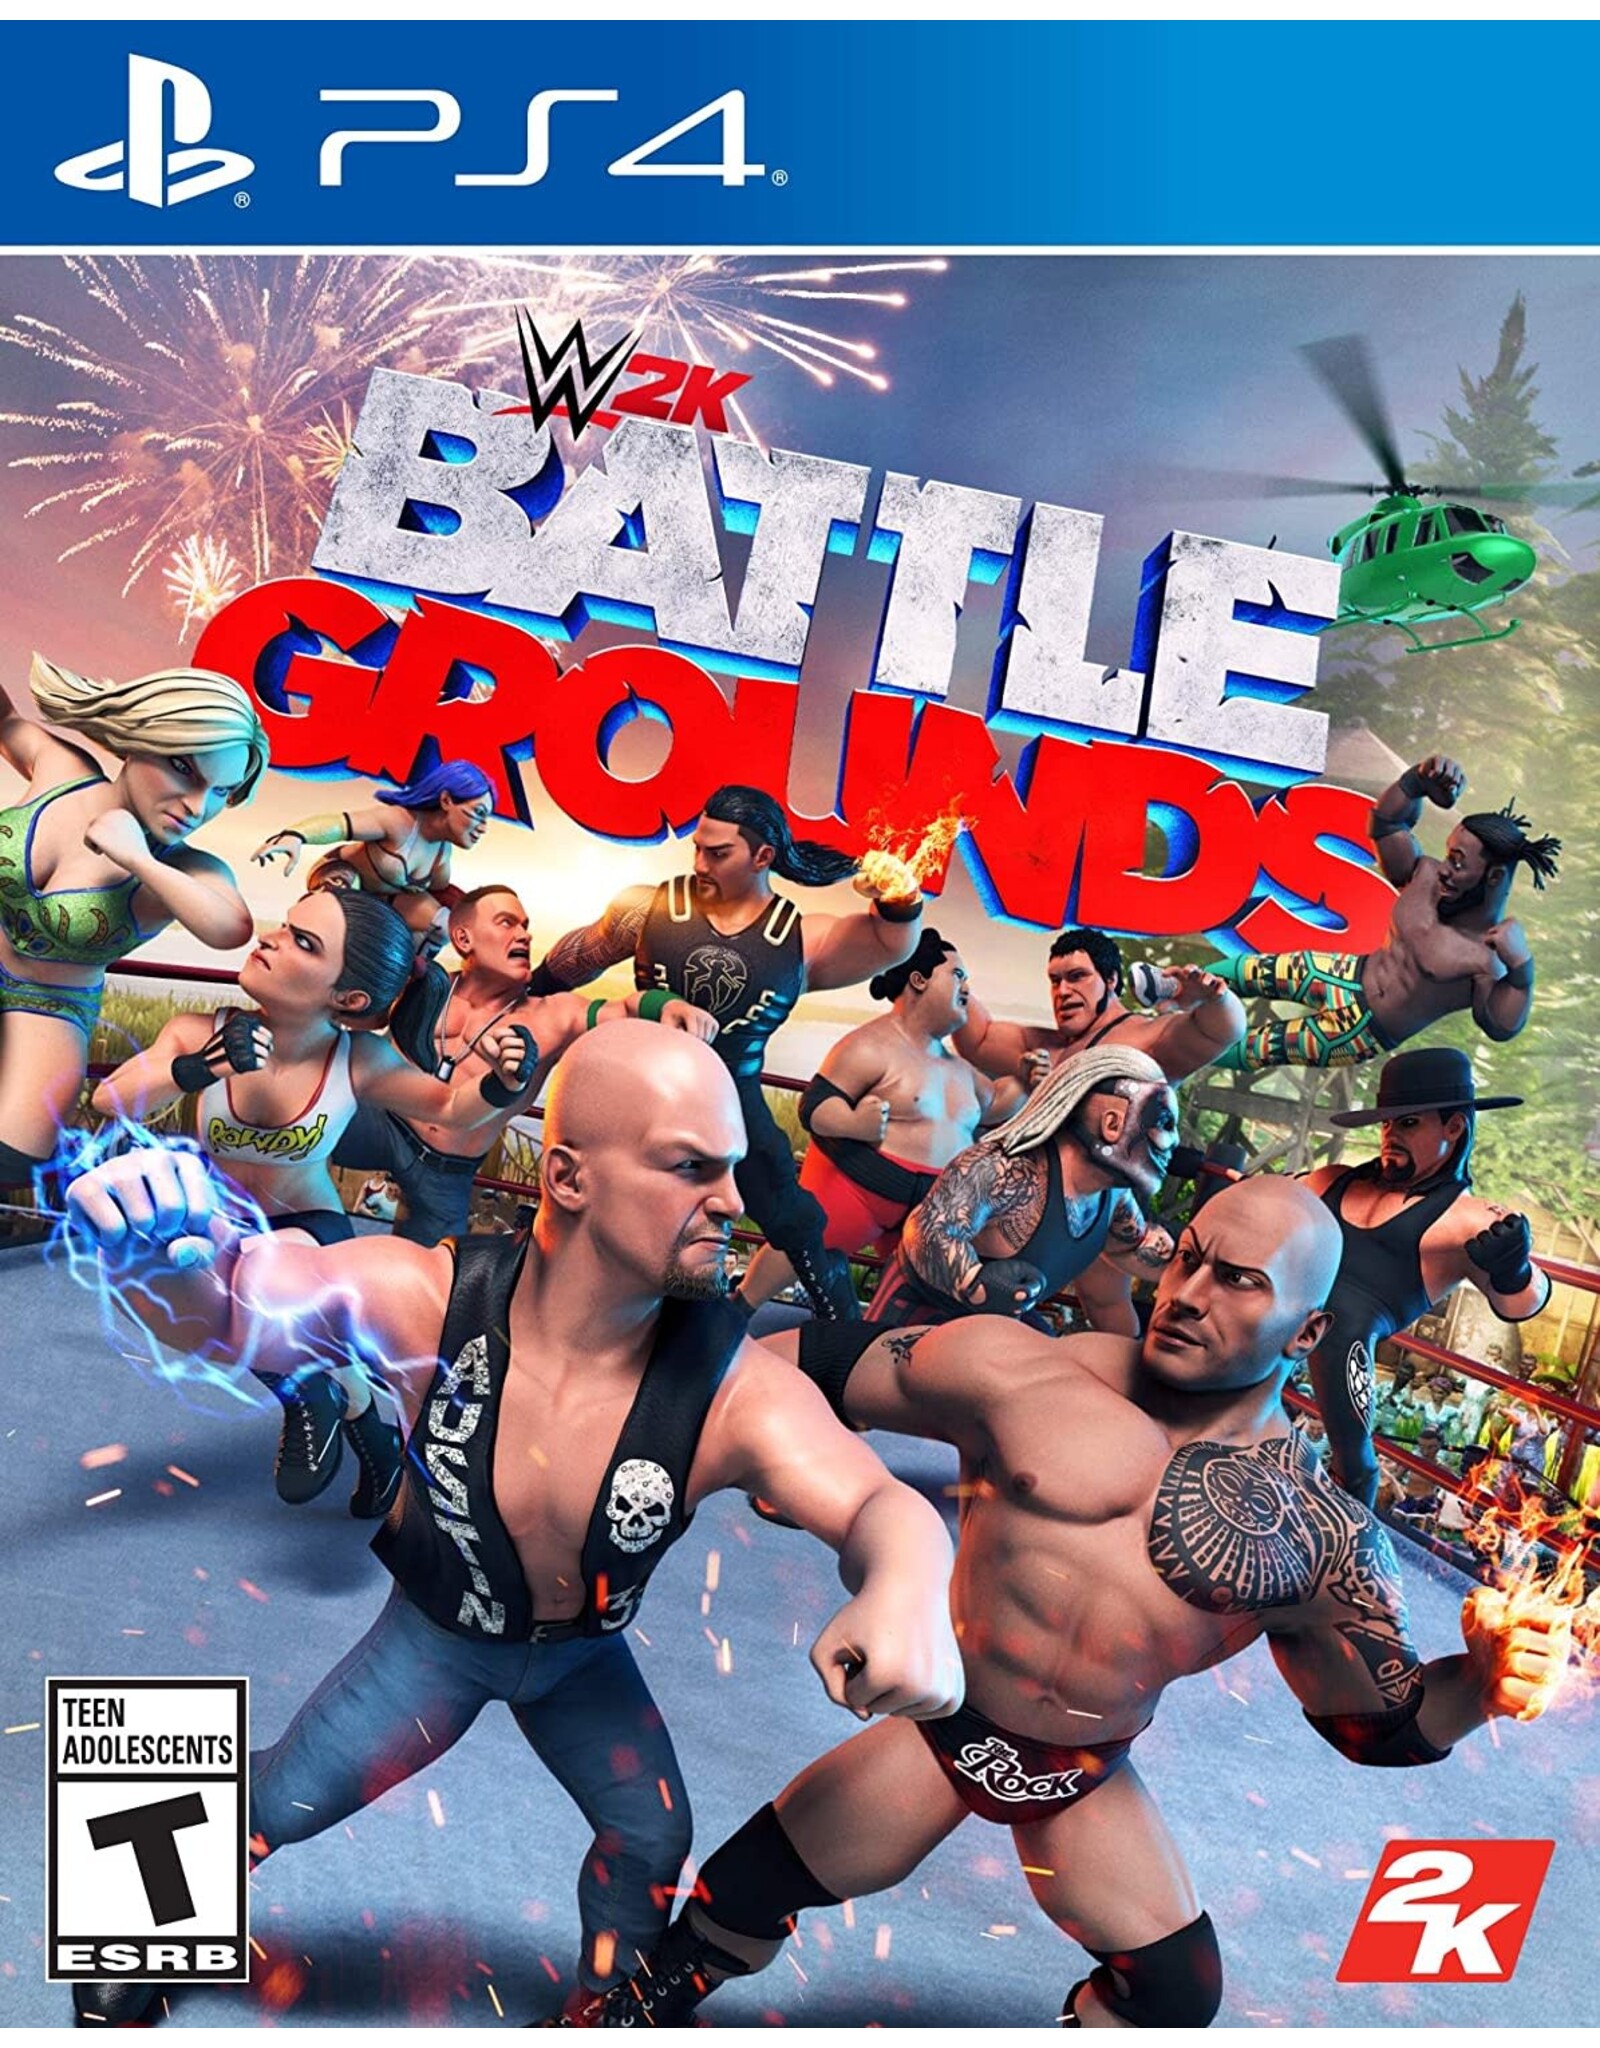 Playstation 4 WWE Battle Grounds (Used)